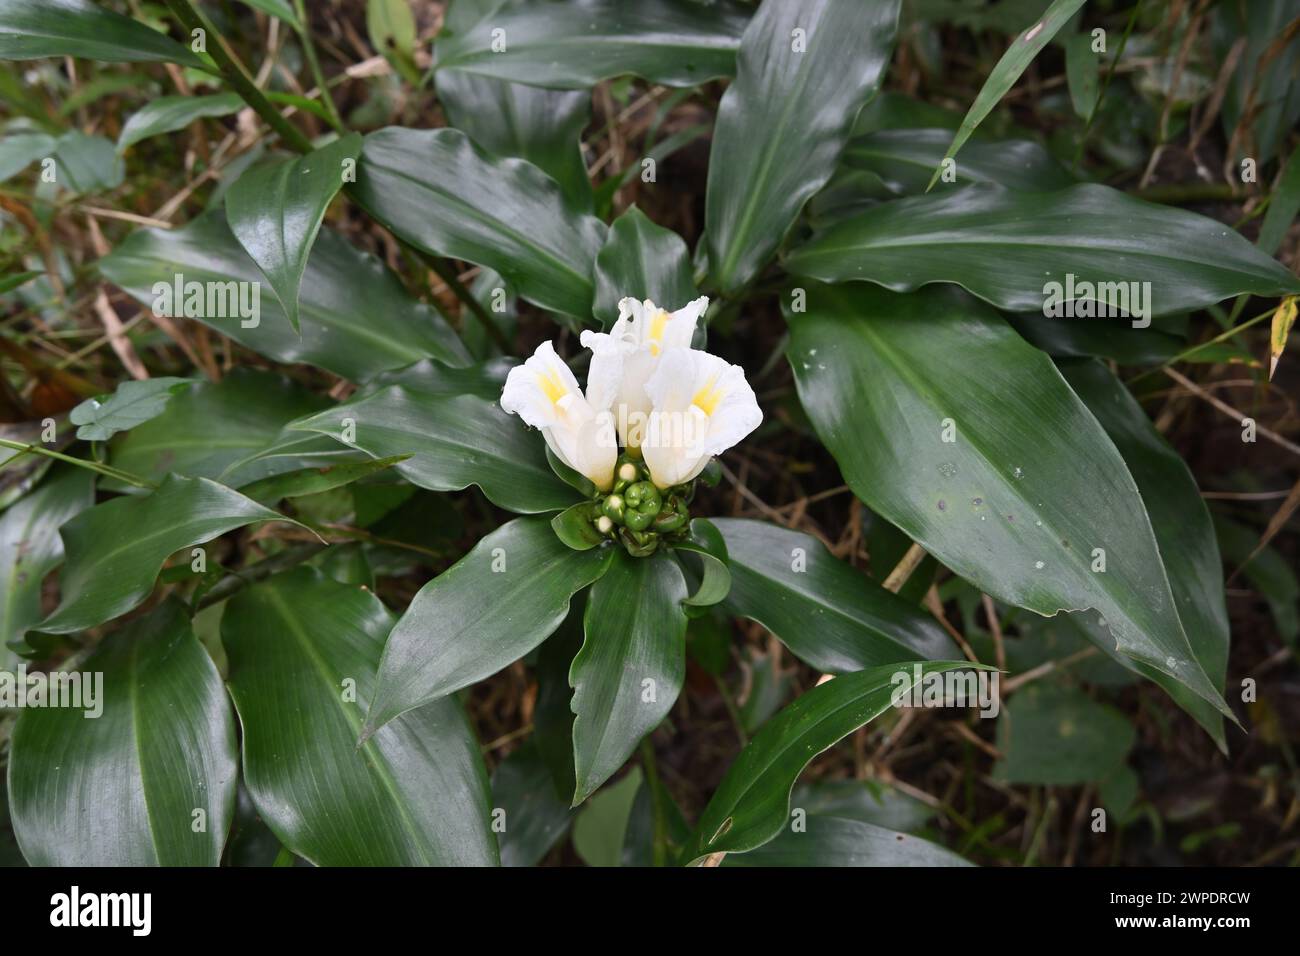 View of a white flower cluster of a Spiral Ginger plant (Costus Dubius) blooming in a wild area Stock Photo